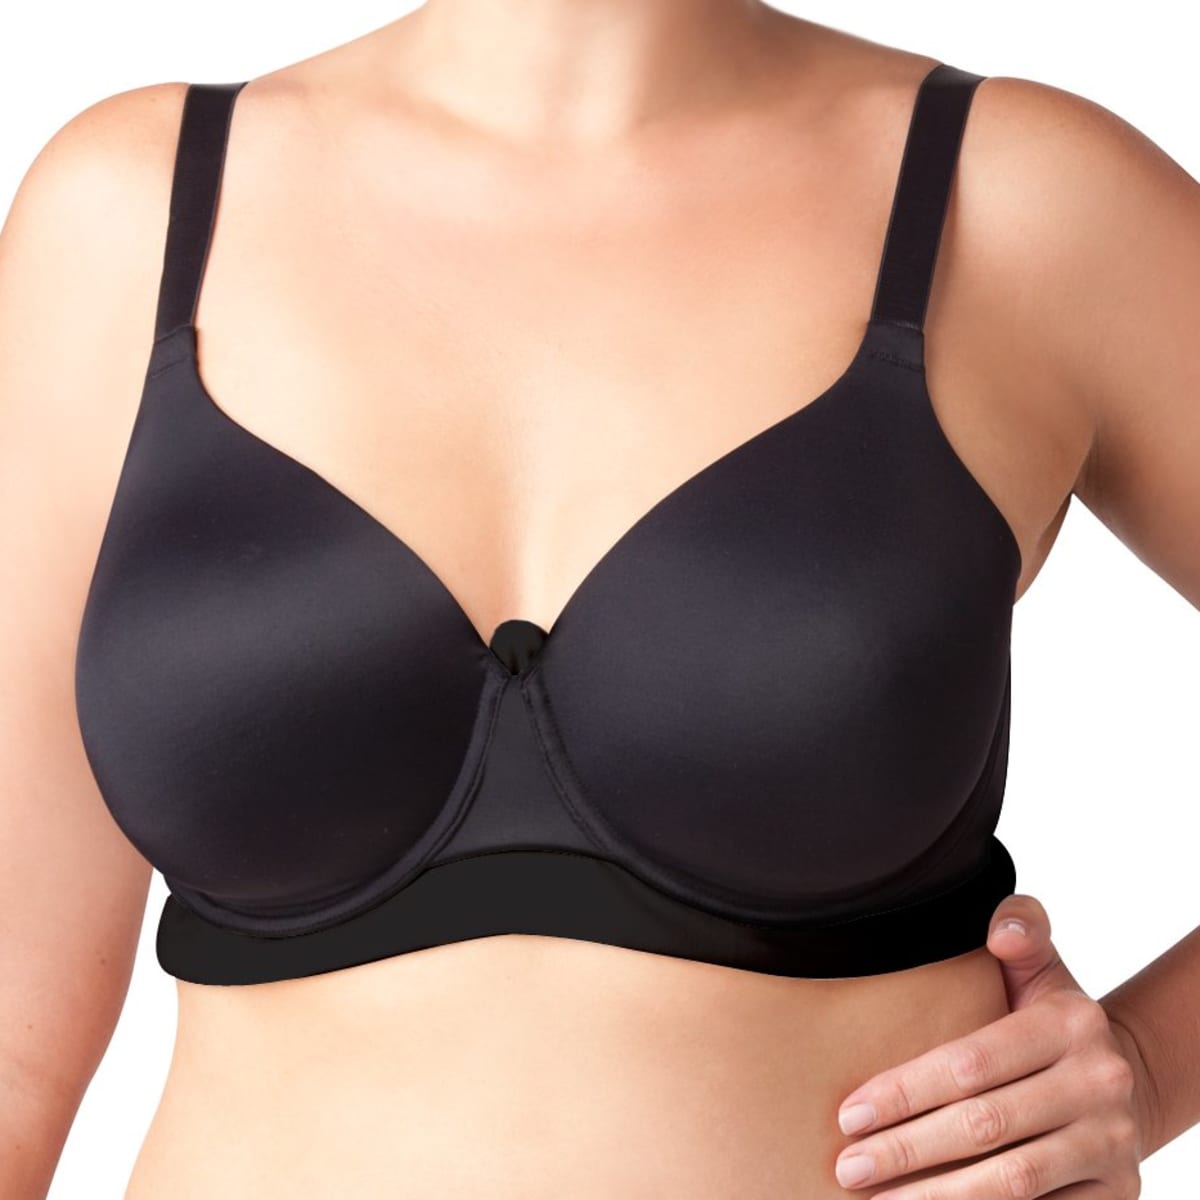 Just My Size Minimizer Bras for Women